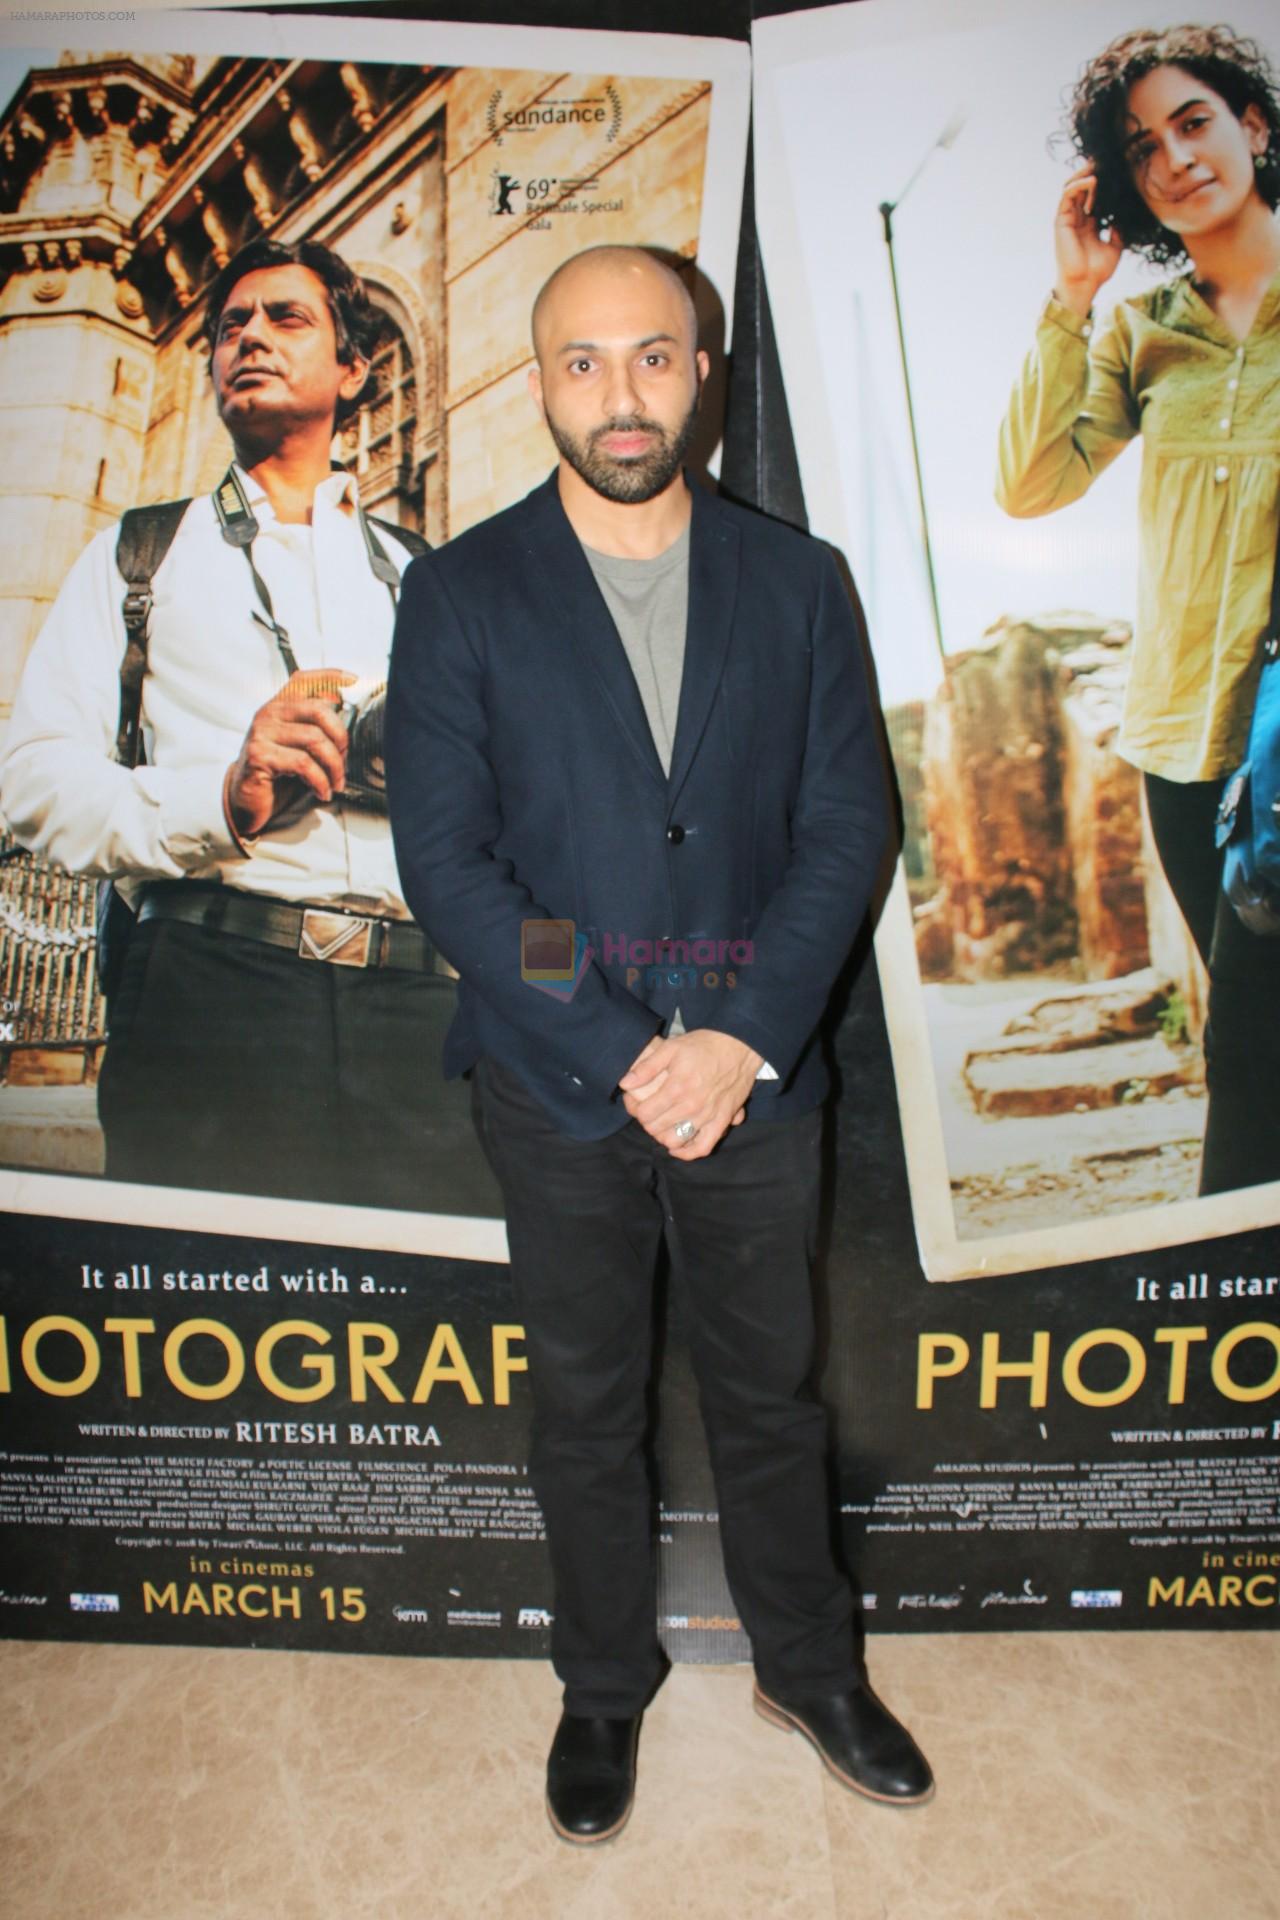 Ritesh Batra at the trailer launch of their film Photograph at The View in andheri on 19th Feb 2019